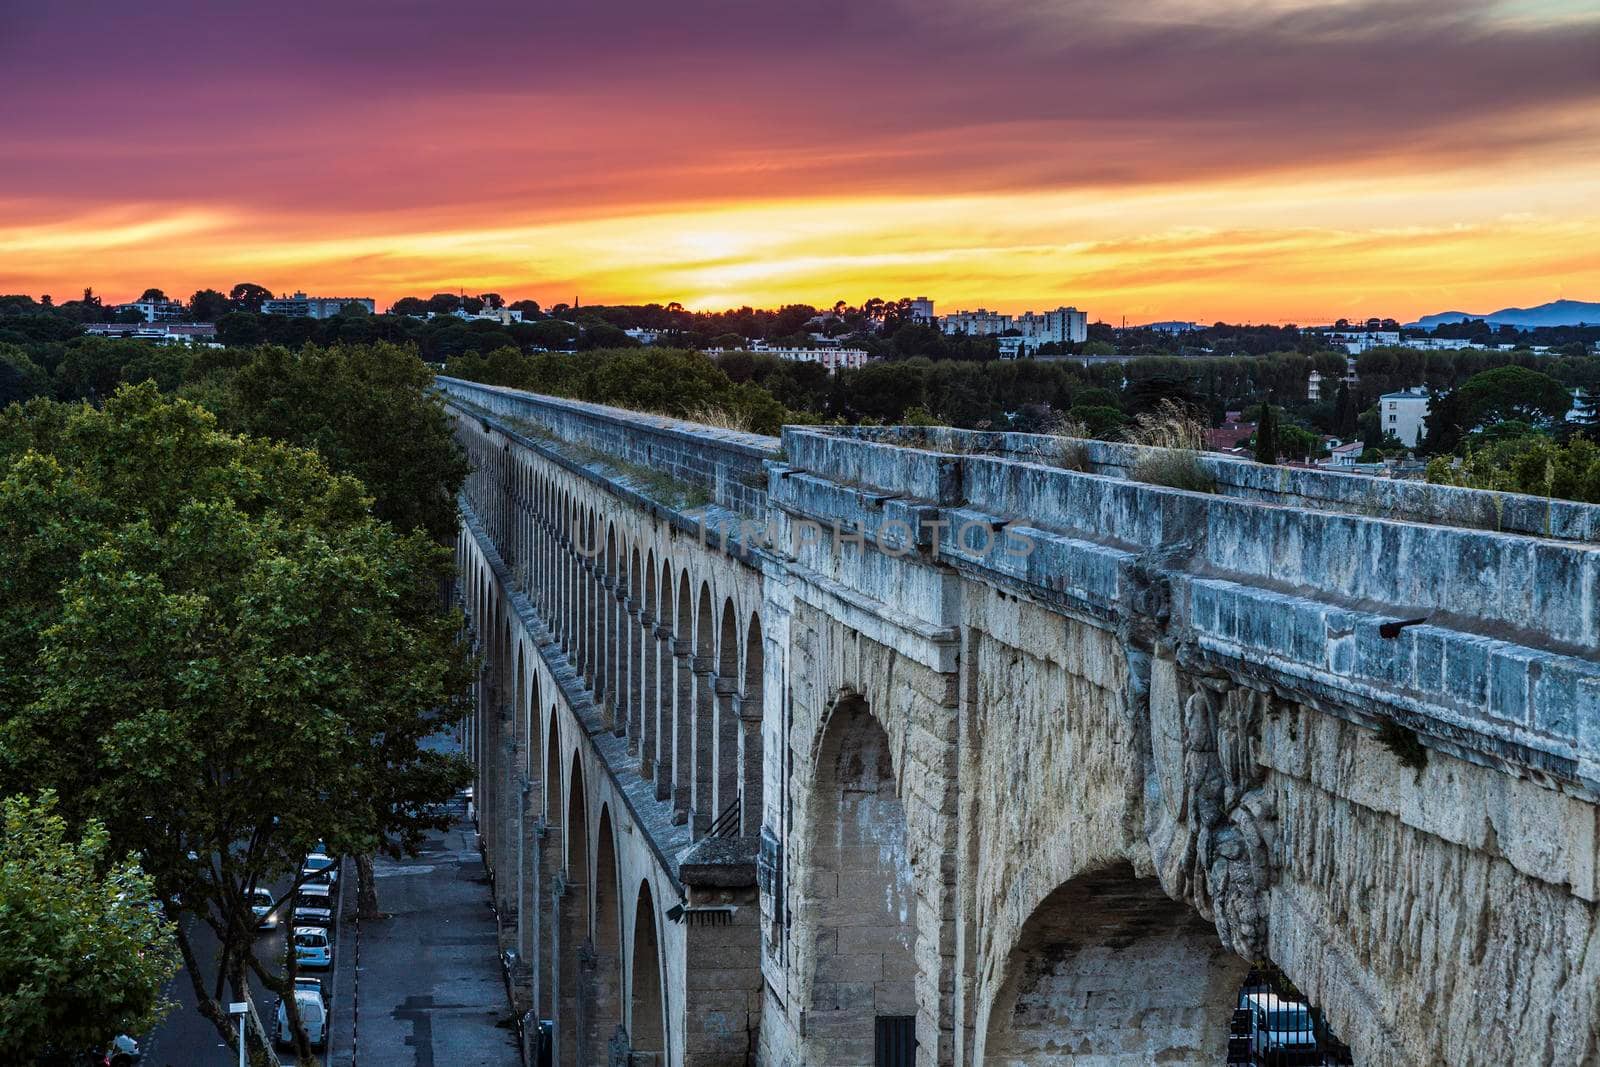 Saint Clement Aqueduct in Montpellier at sunset. Montpellier, Occitanie, France.